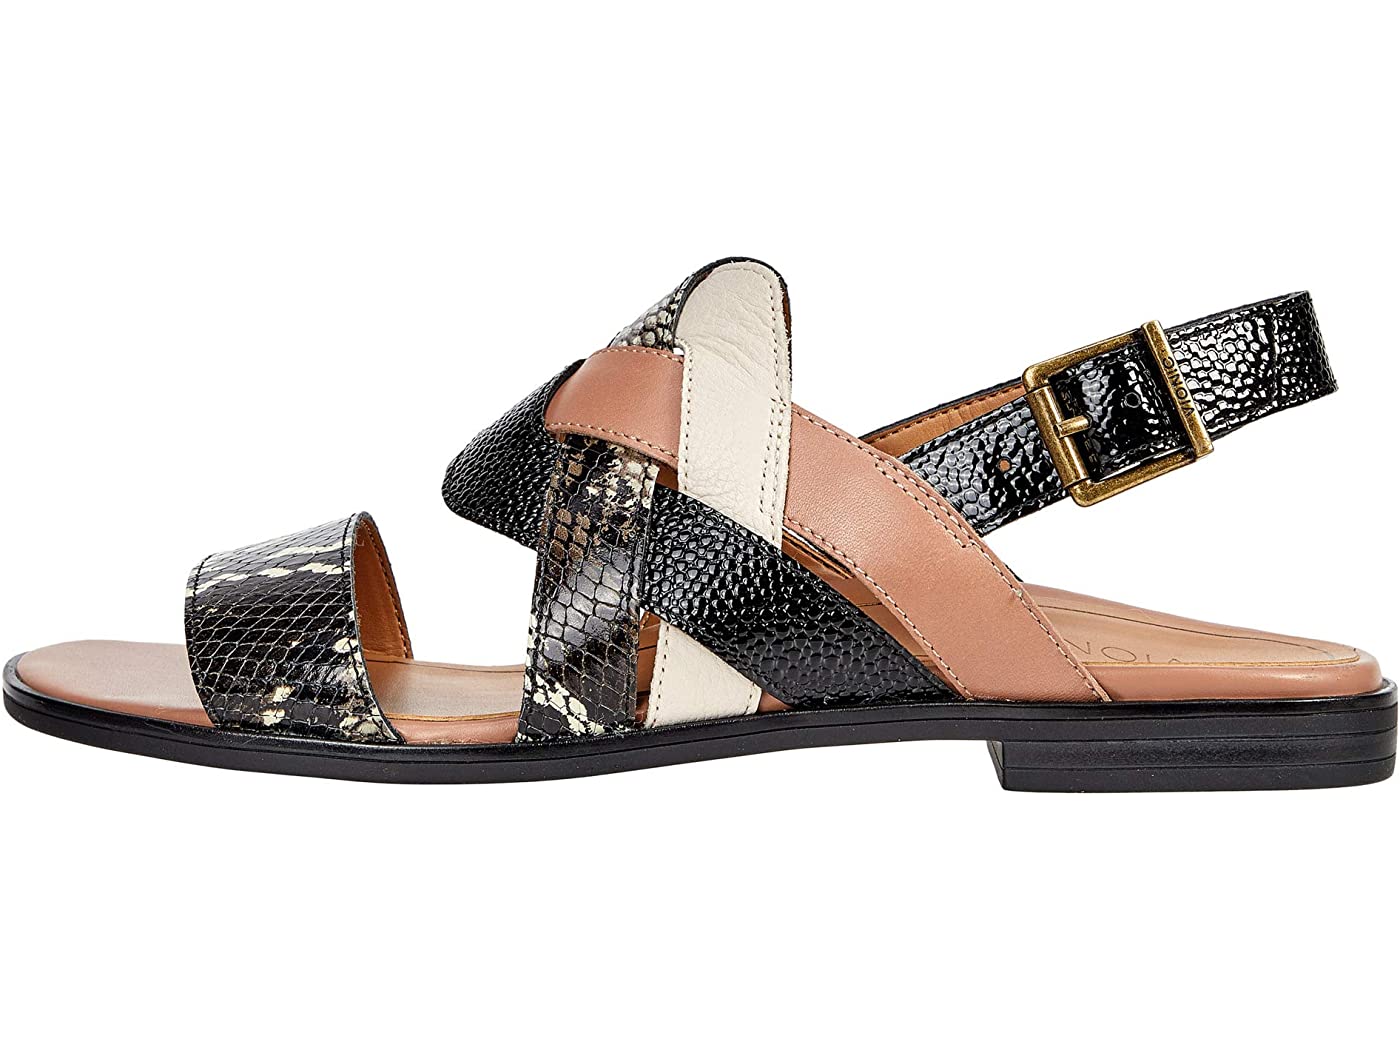 Vionic Stylish Sandals Secretly Have Amazing Arch Support | Us Weekly